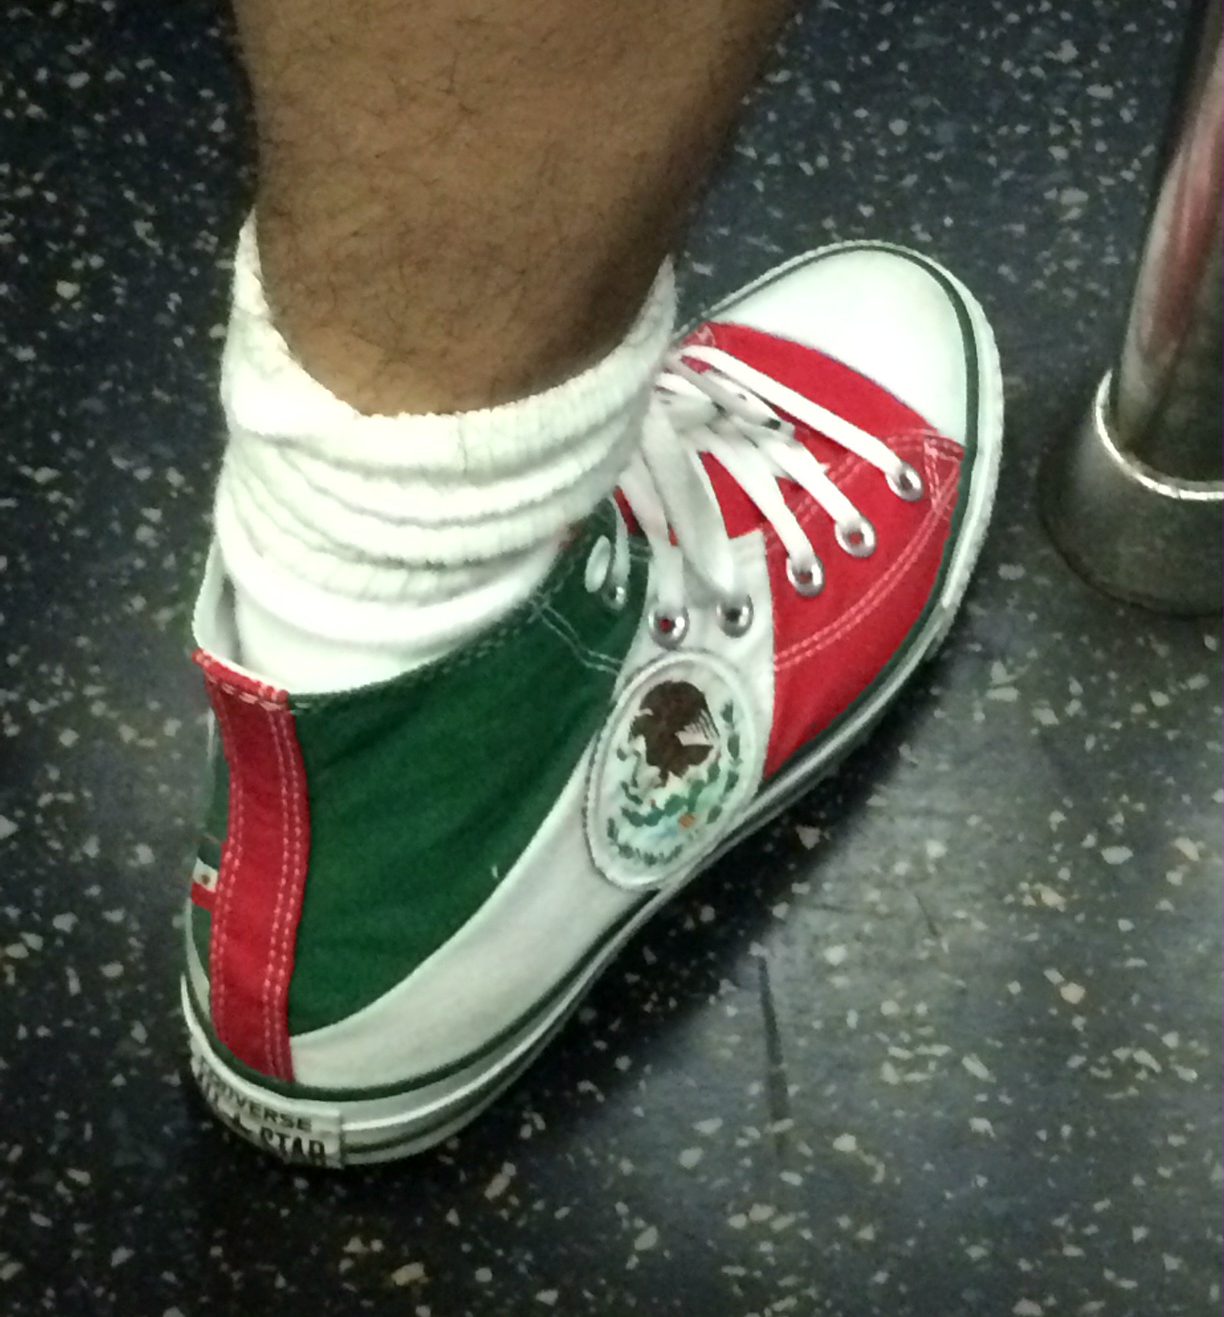 Mexalert! Mexican Converse Spotted in New City – MI BLOG TU